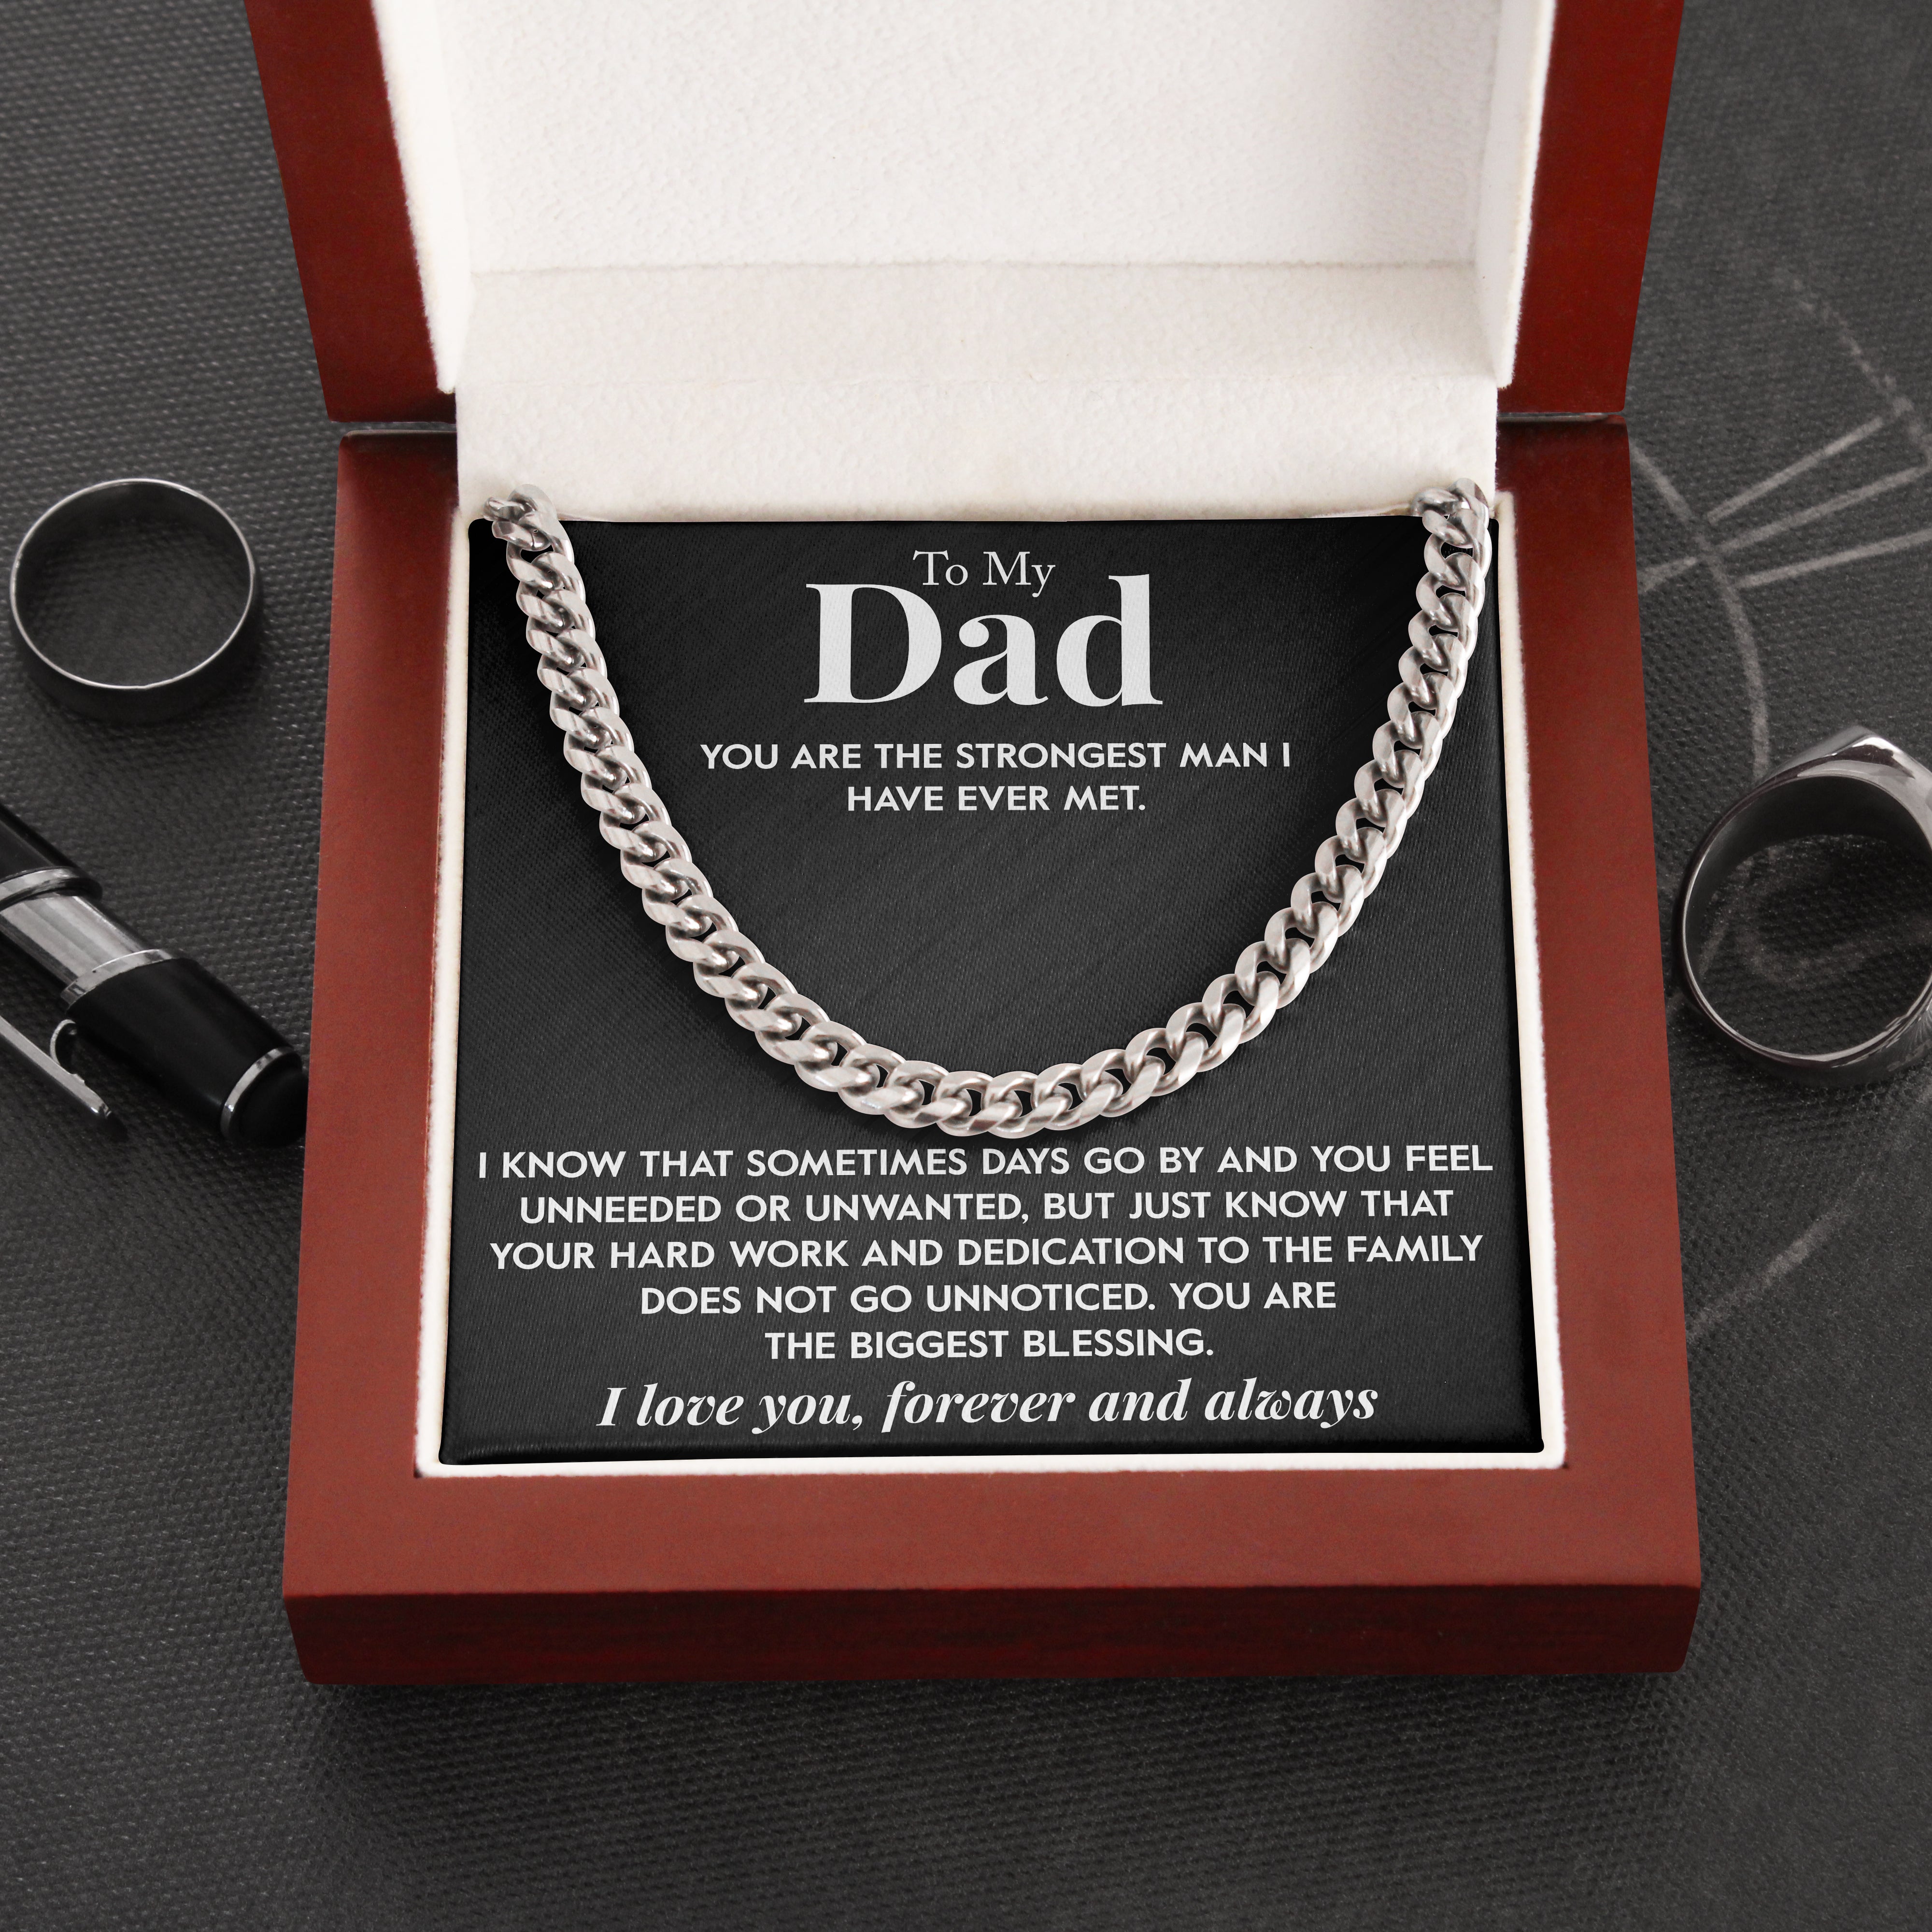 To My Dad | "Biggest Blessing" | Cuban Chain Link